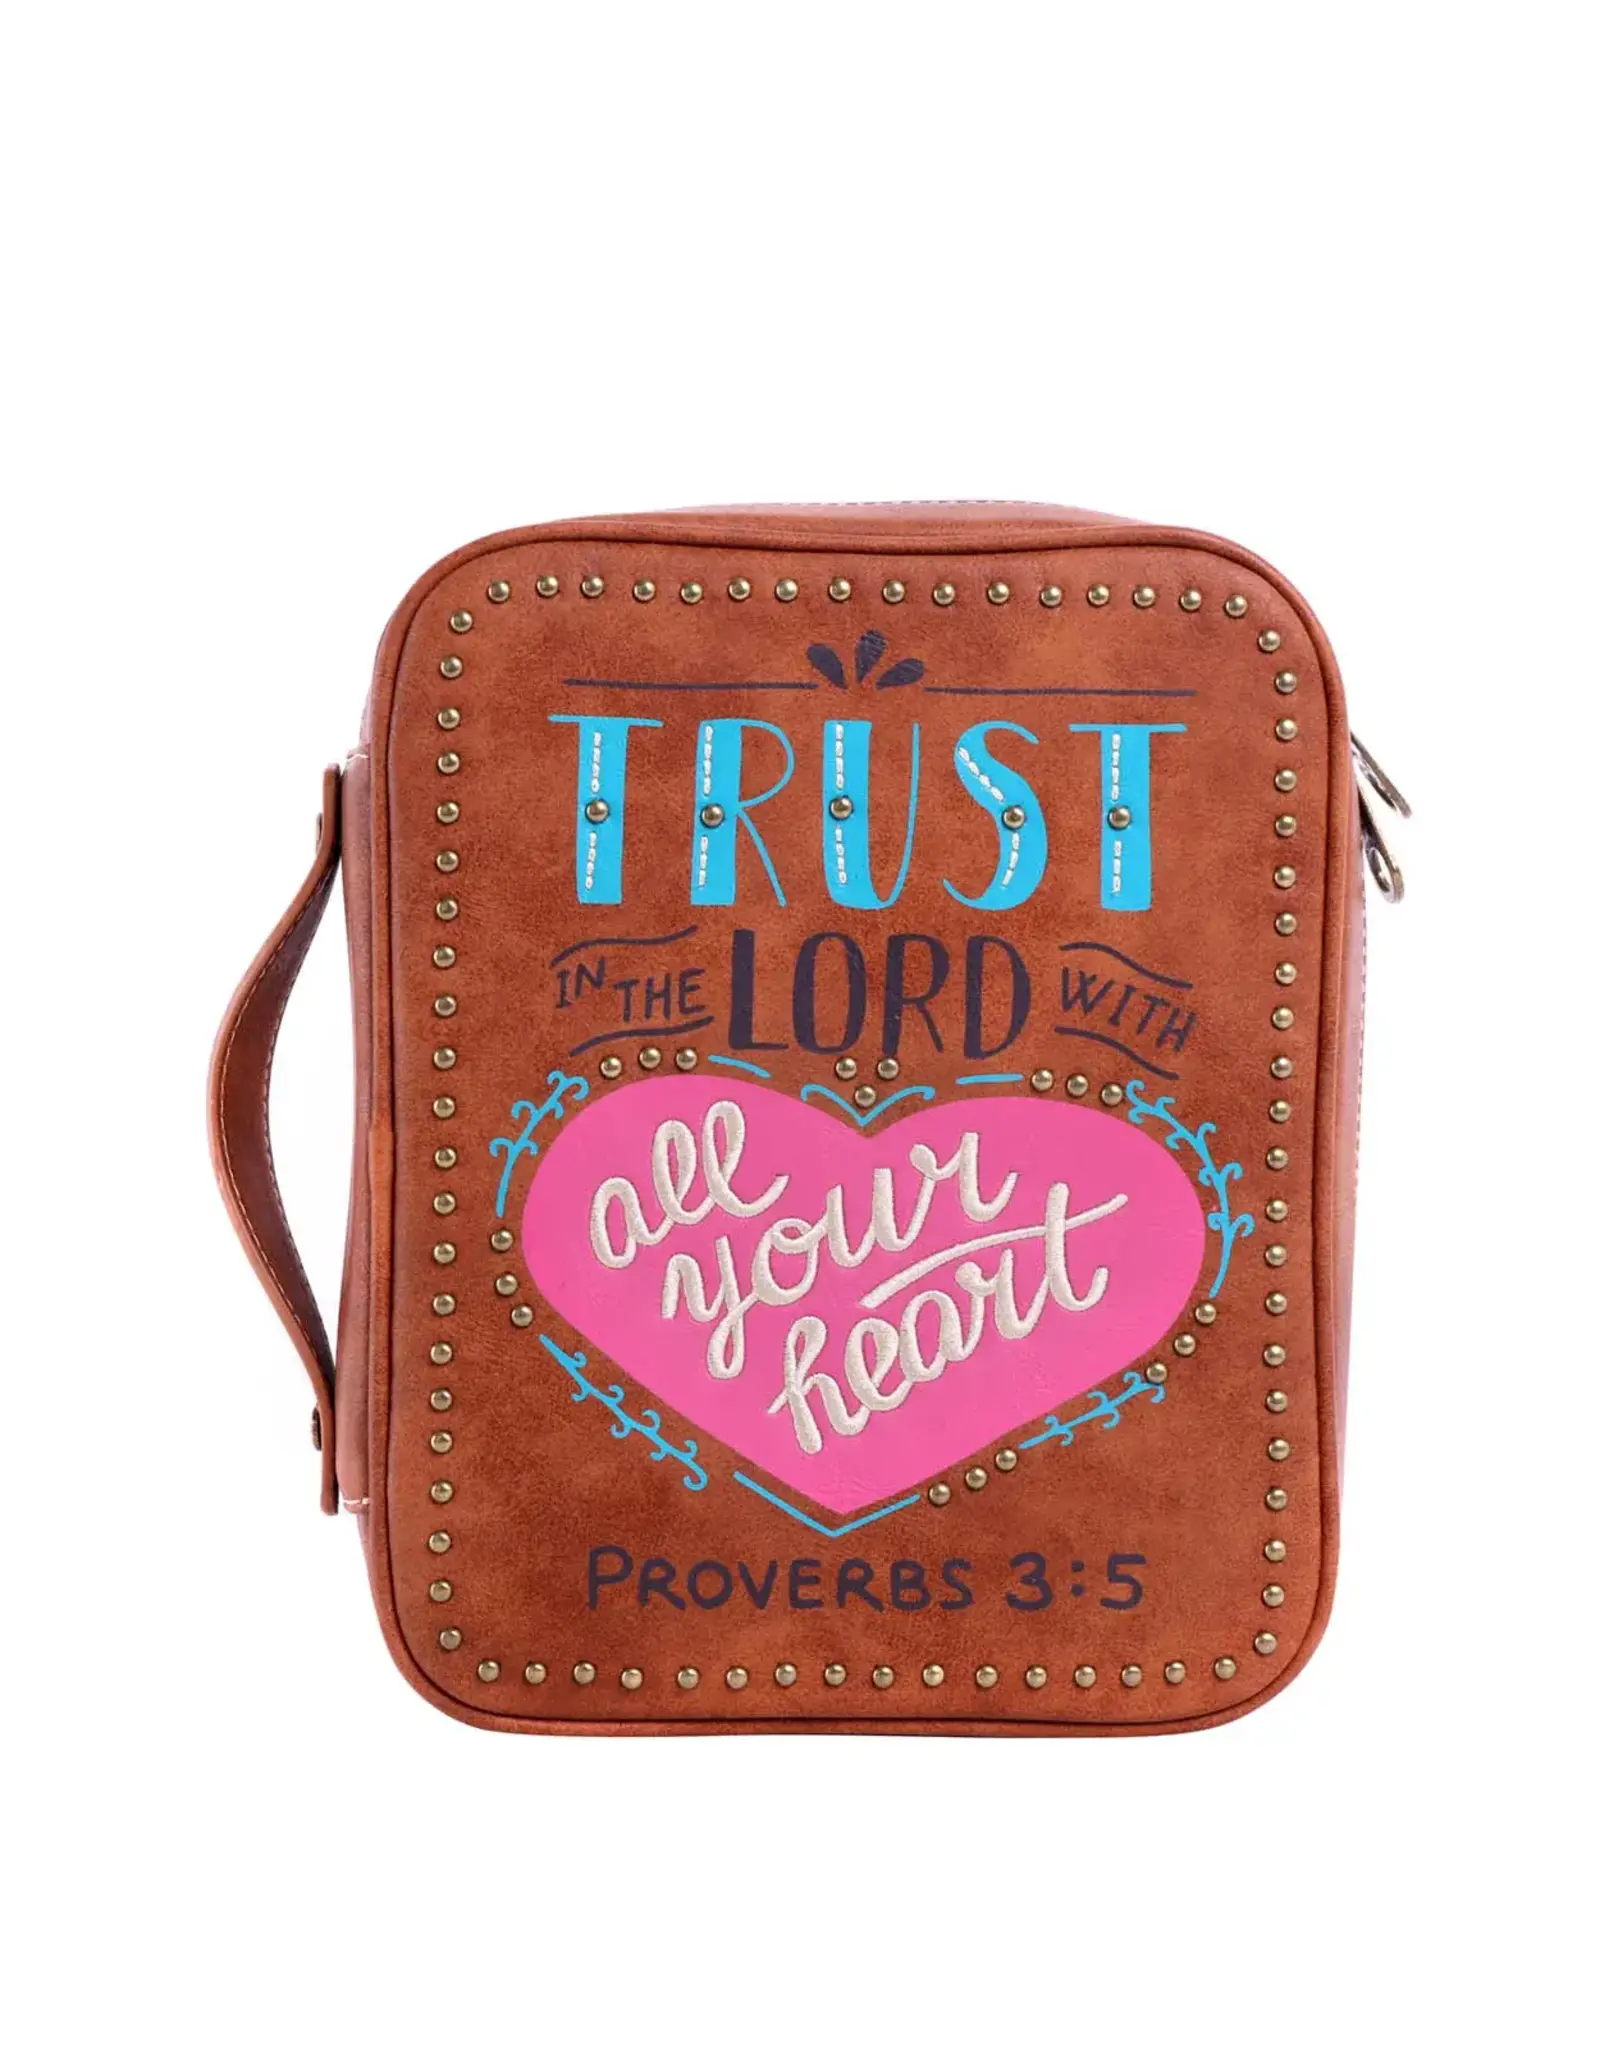 BIBLE COVER "TRUST IN THE LORD WITH ALL YOUR HEART"